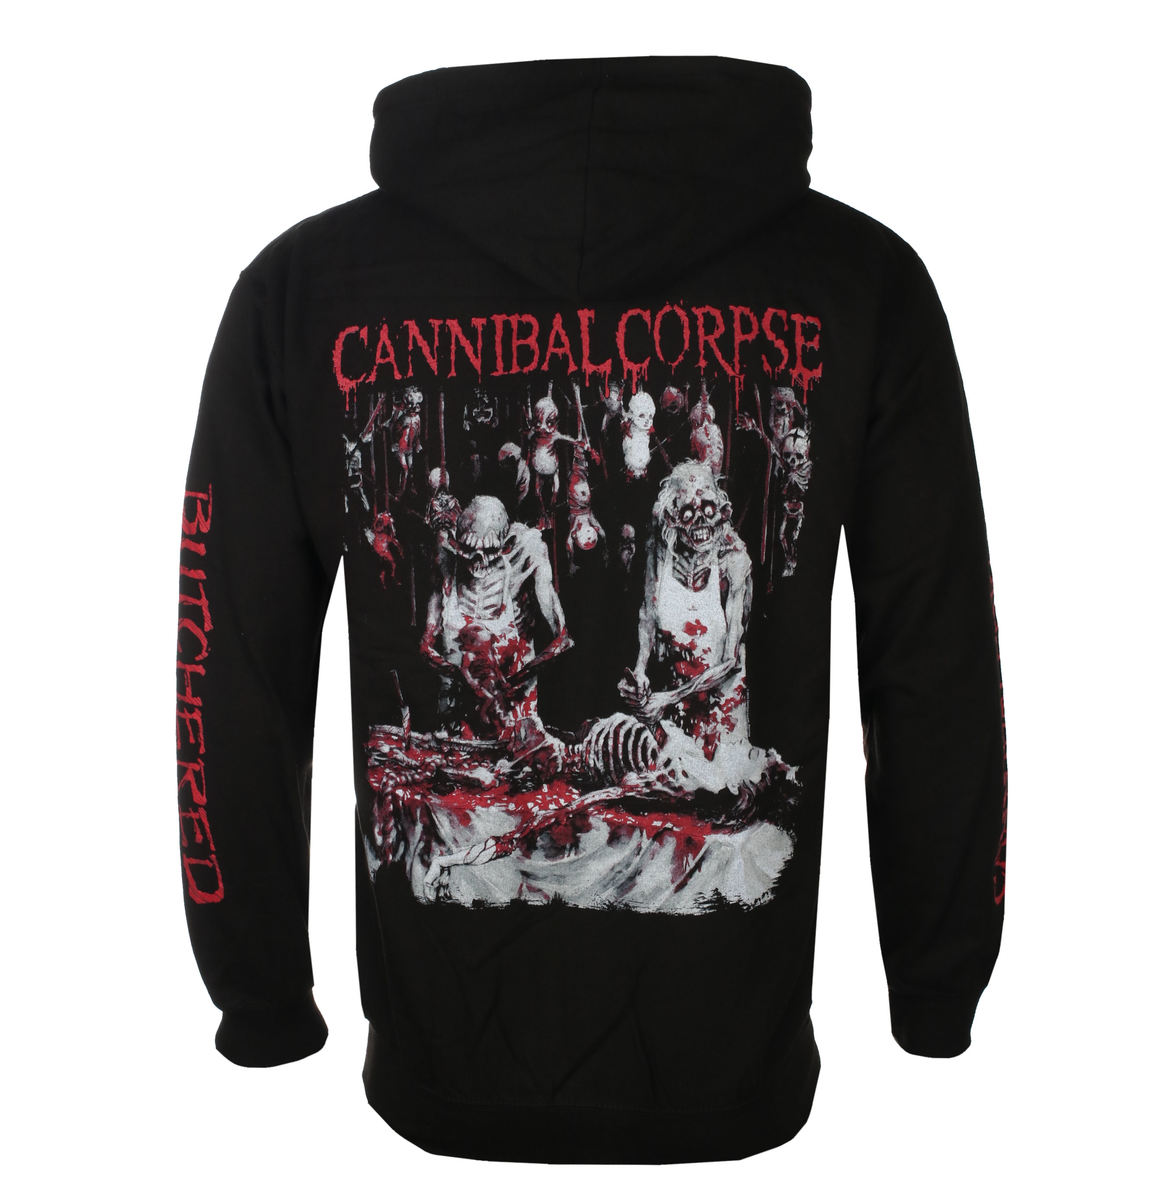 Cannibal Corpse - Butchered At Birth